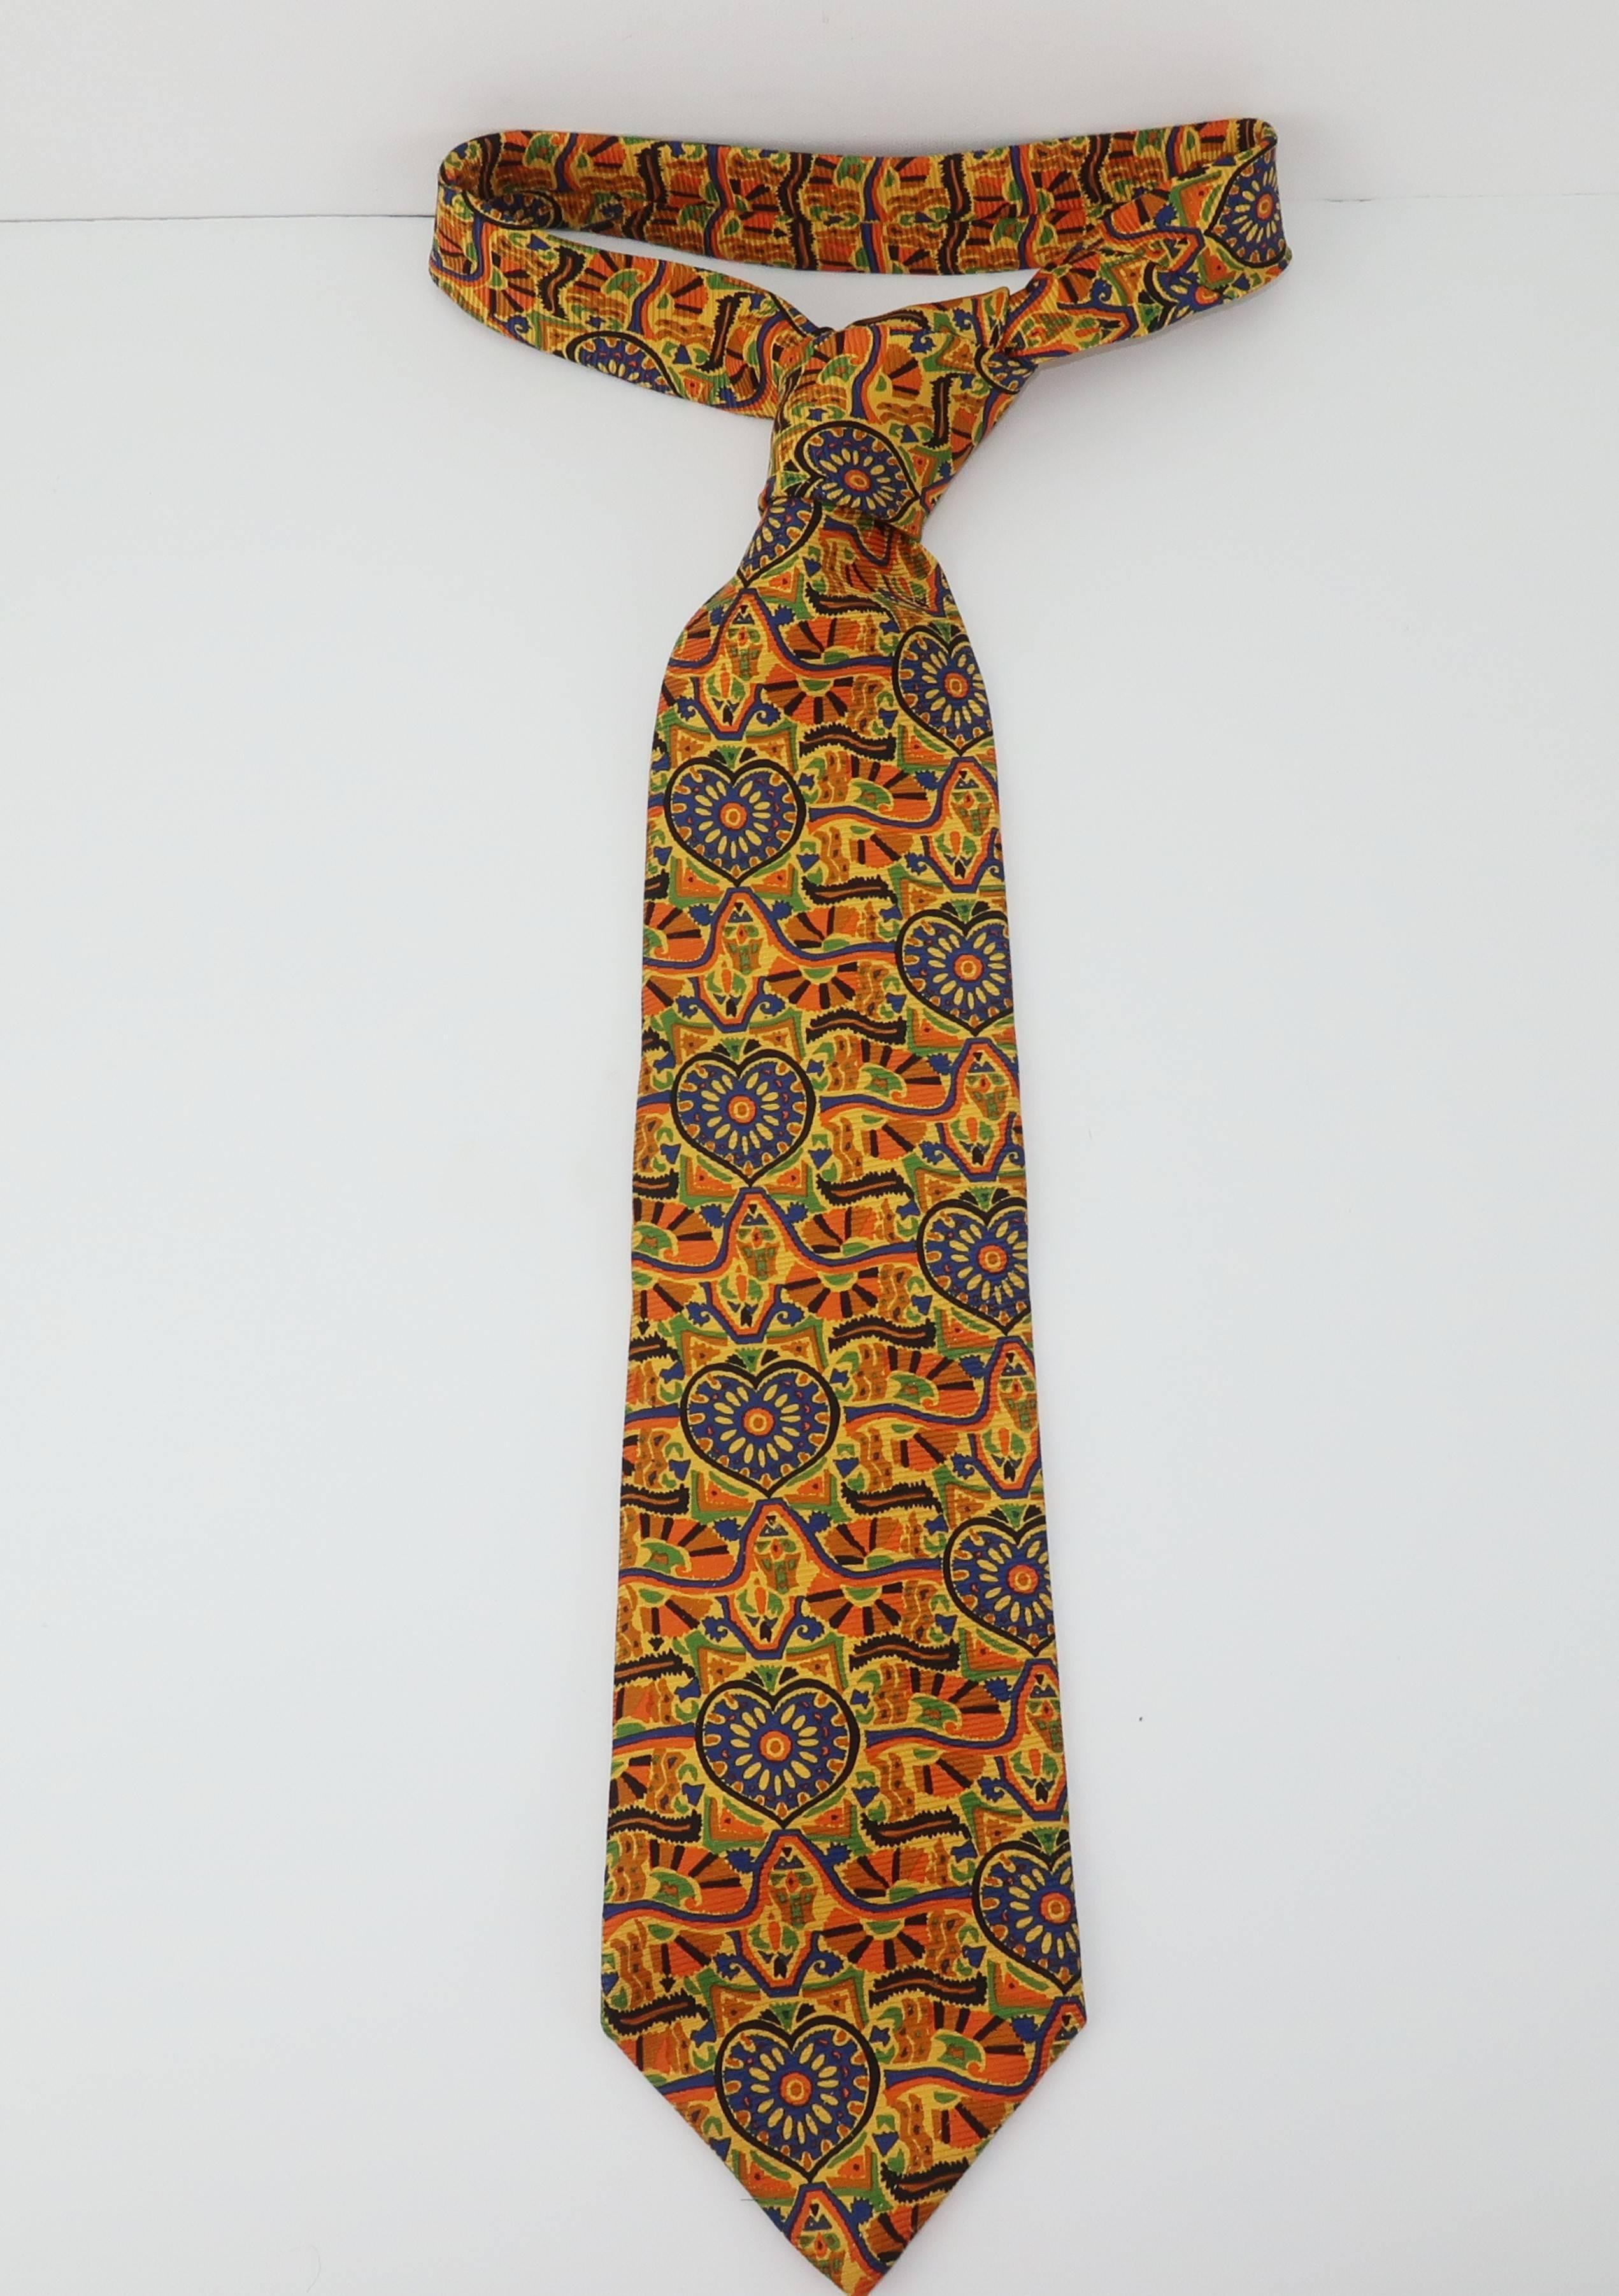 Christian Lacroix, the king of 1980's flamboyant designs, sheds some light (and a lot of pizazz) on men's necktie fashions with this colorful silk tie.  The opulent pattern hints at heart shapes with an abstractly exotic background.  Golden yellows